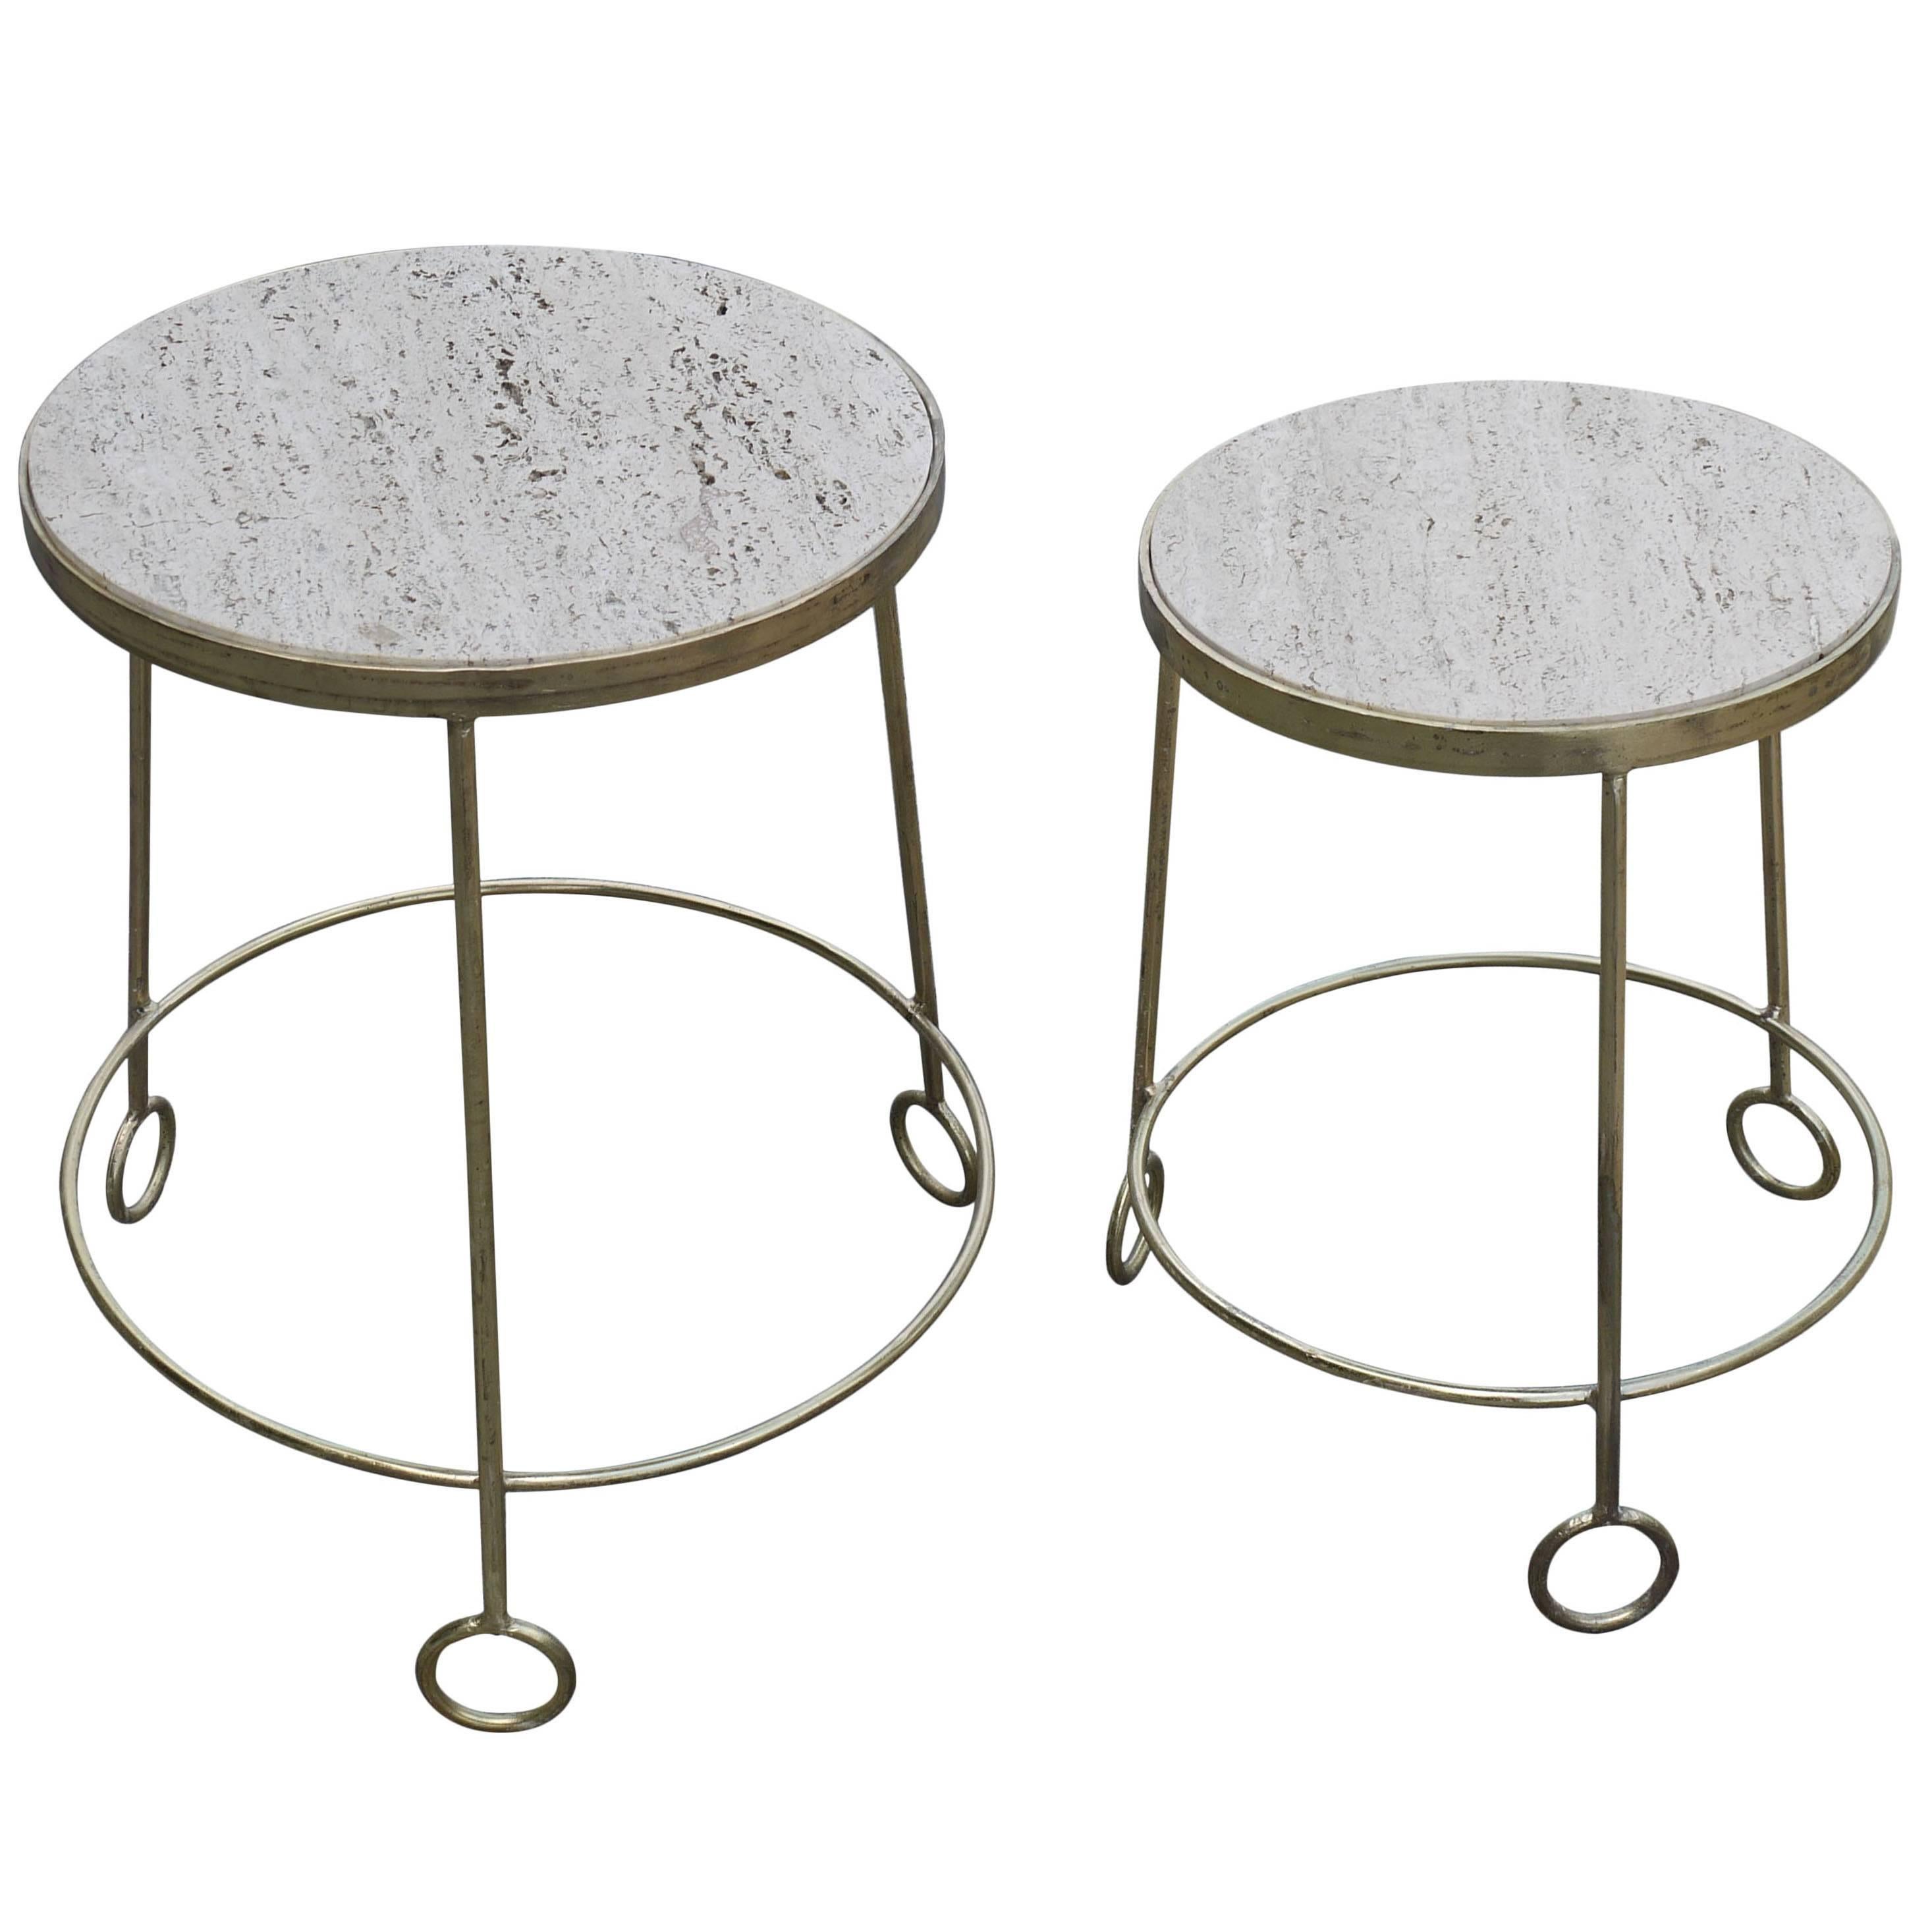 Graduated Set of "Yoyo" Side Tables After Jean Royere